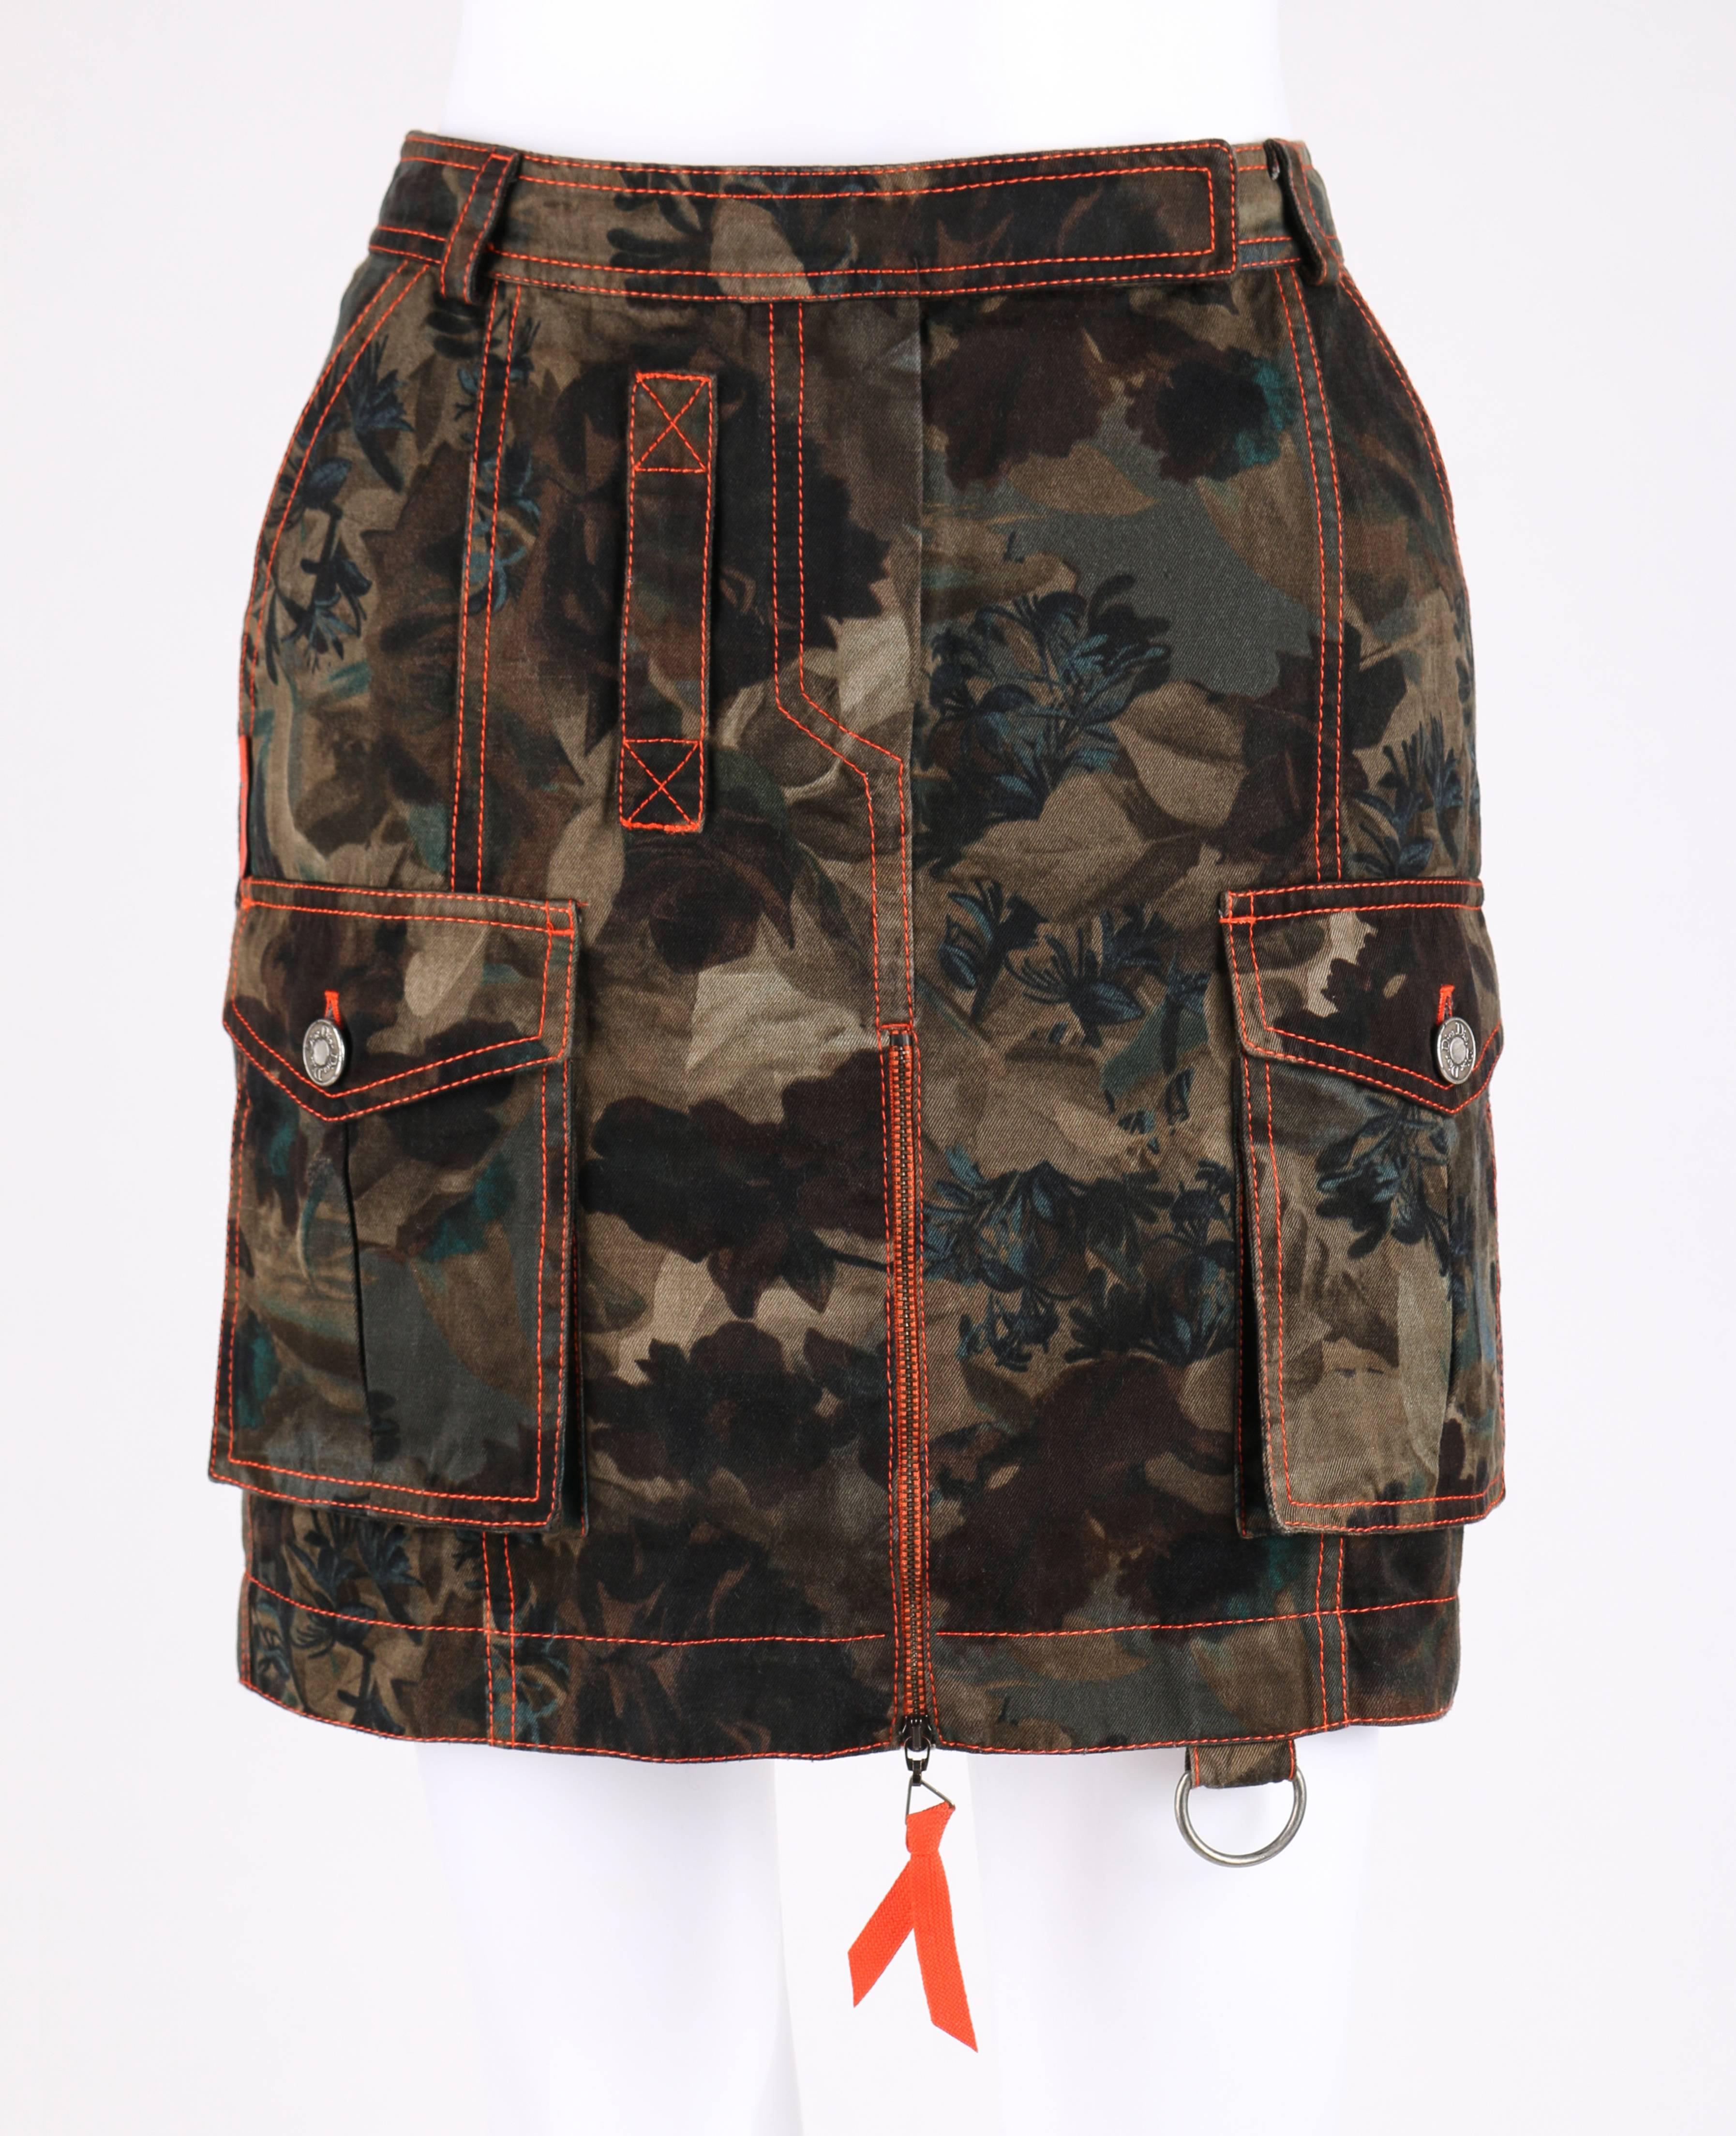 Christian Dior S/S 2001 hidden dark floral camouflage military inspired cotton denim print cargo skirt. Designed by John Galliano. Center front exposed metal zipper closure with orange zipper pull. Two front inverted pleat bellow pockets with flap